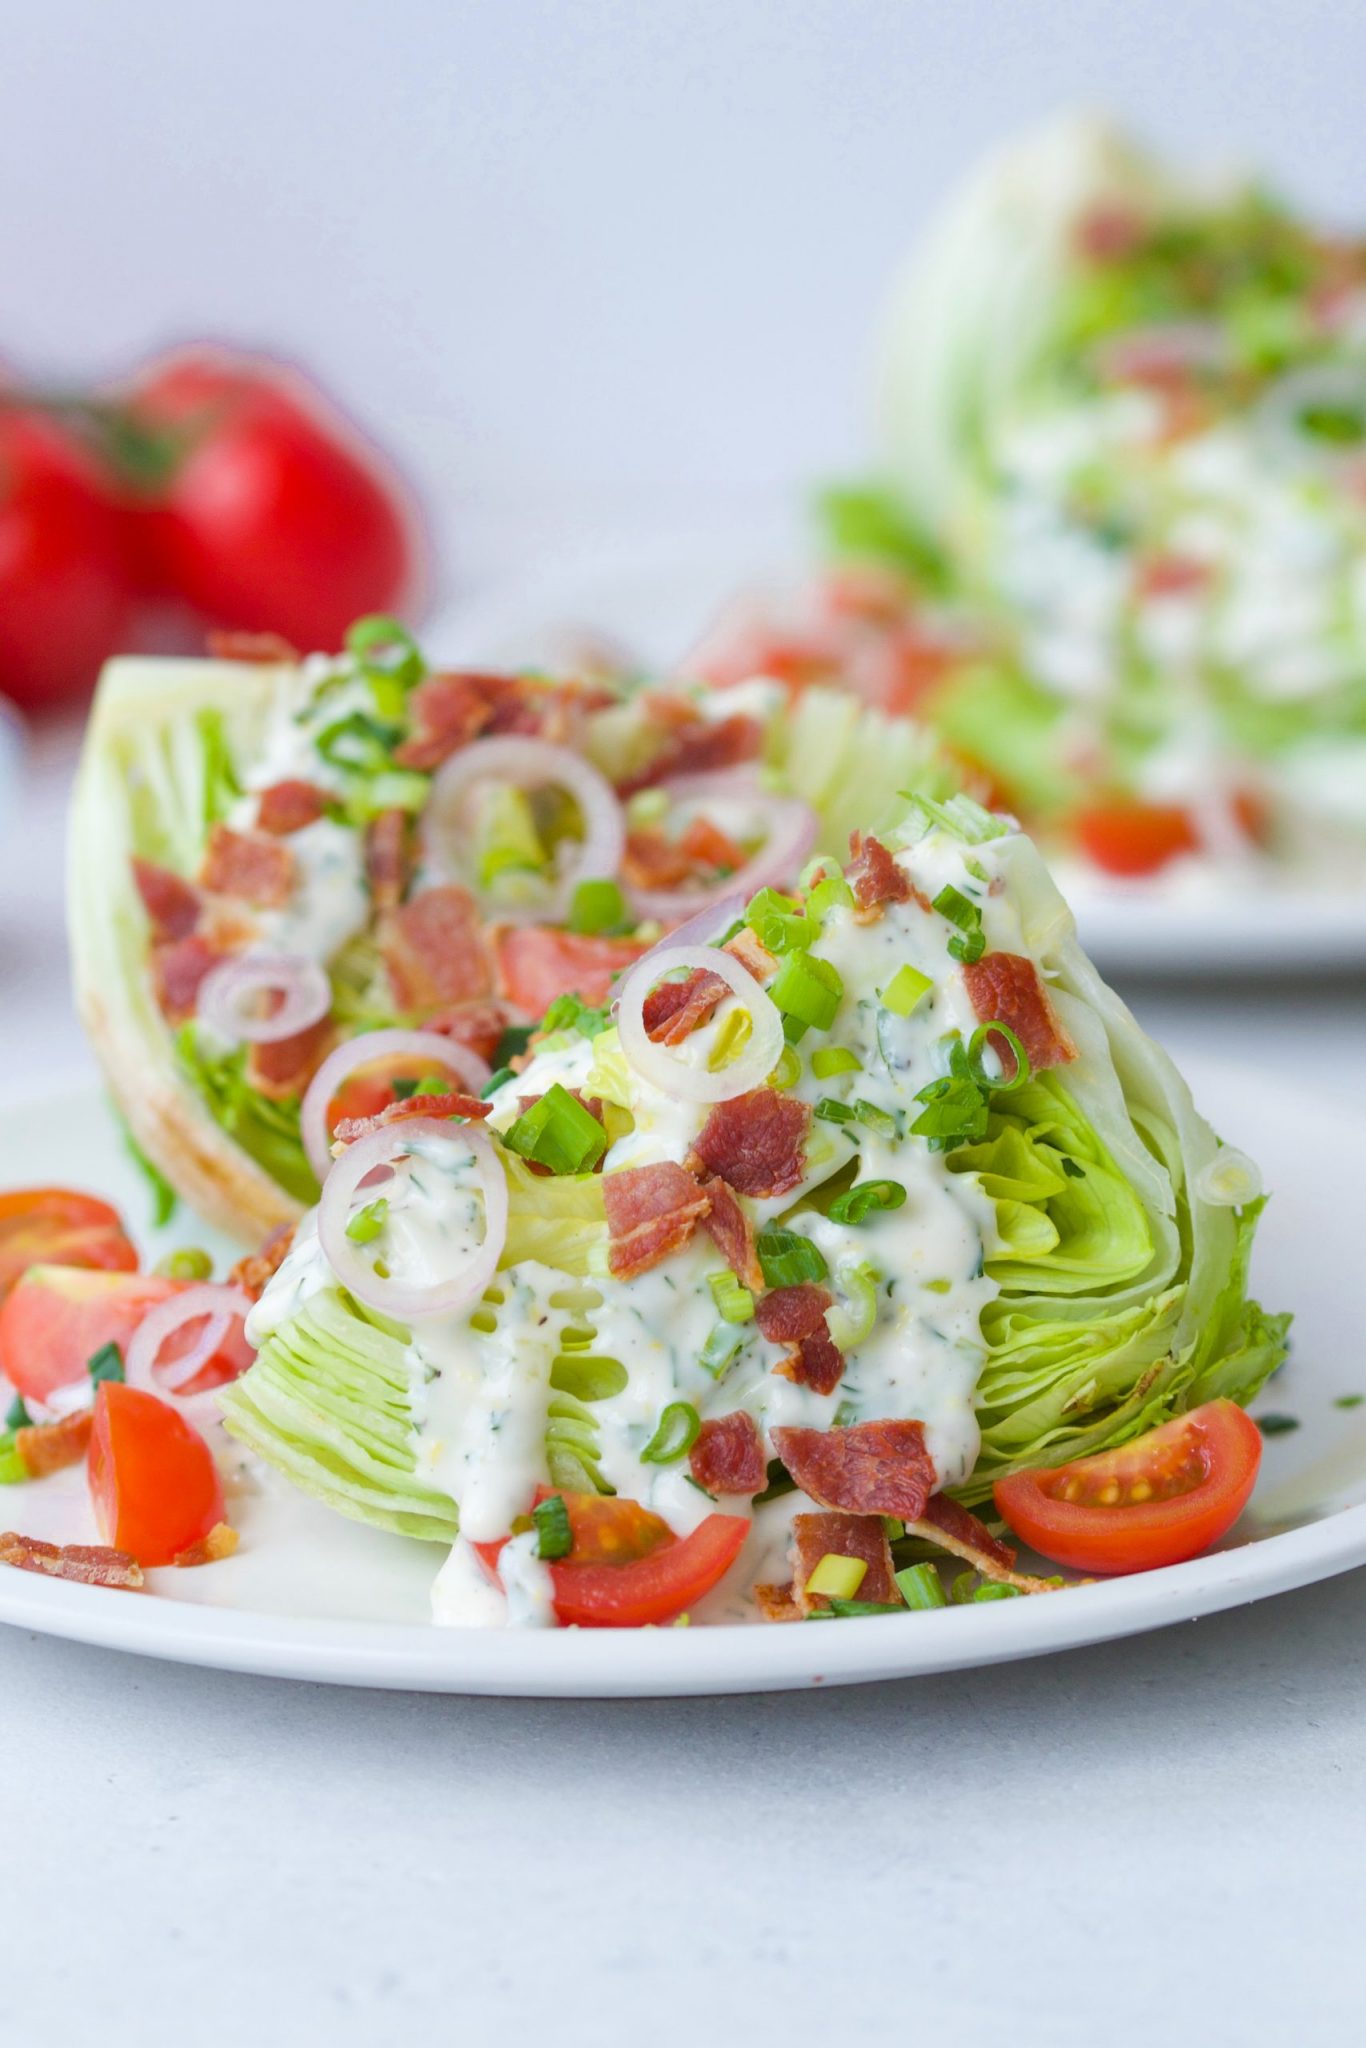 How to Cut Iceberg Lettuce for Wedge Salads, Tacos, & More